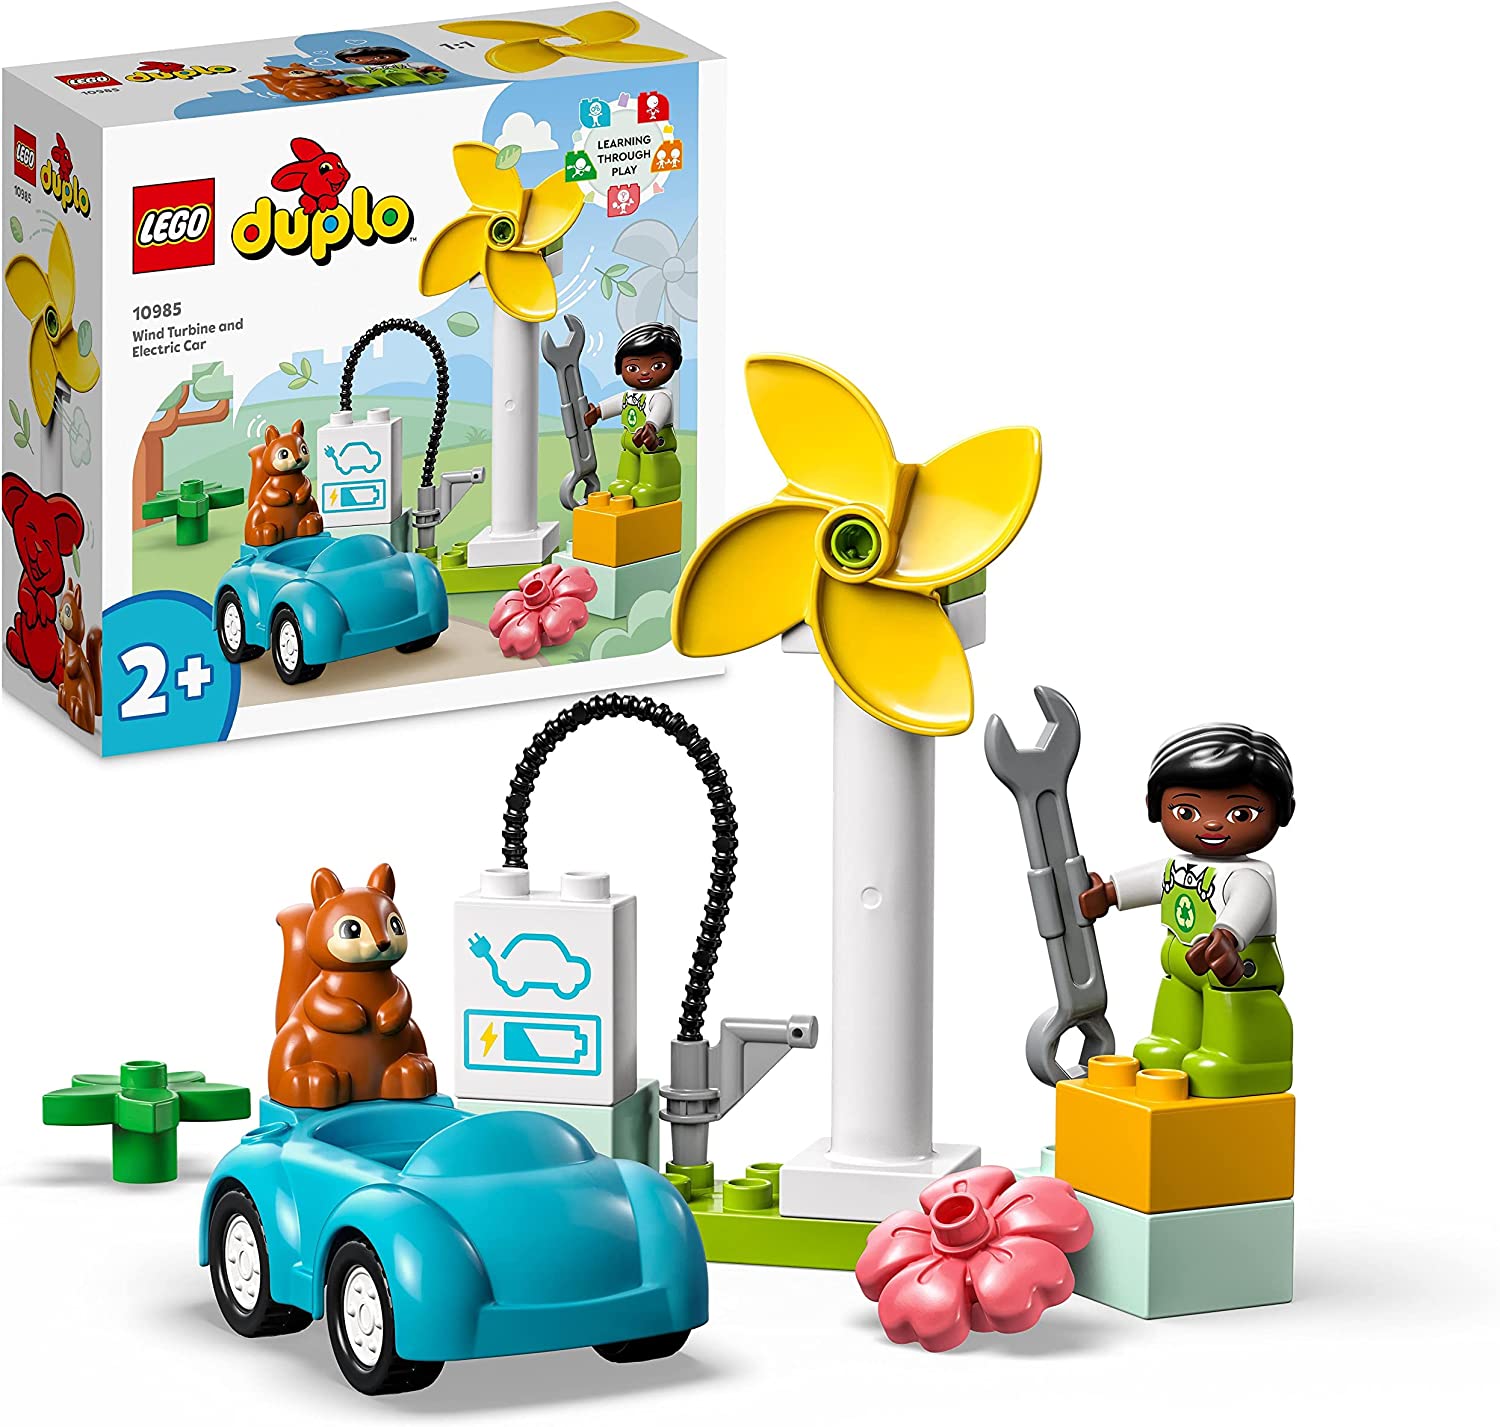 LEGO 10985 Duplo Town Windmill and Electric Car, Toy Car Educational Toy for Girls and Boys from 2 Years, for Sustainable Play and Development of Toddlers